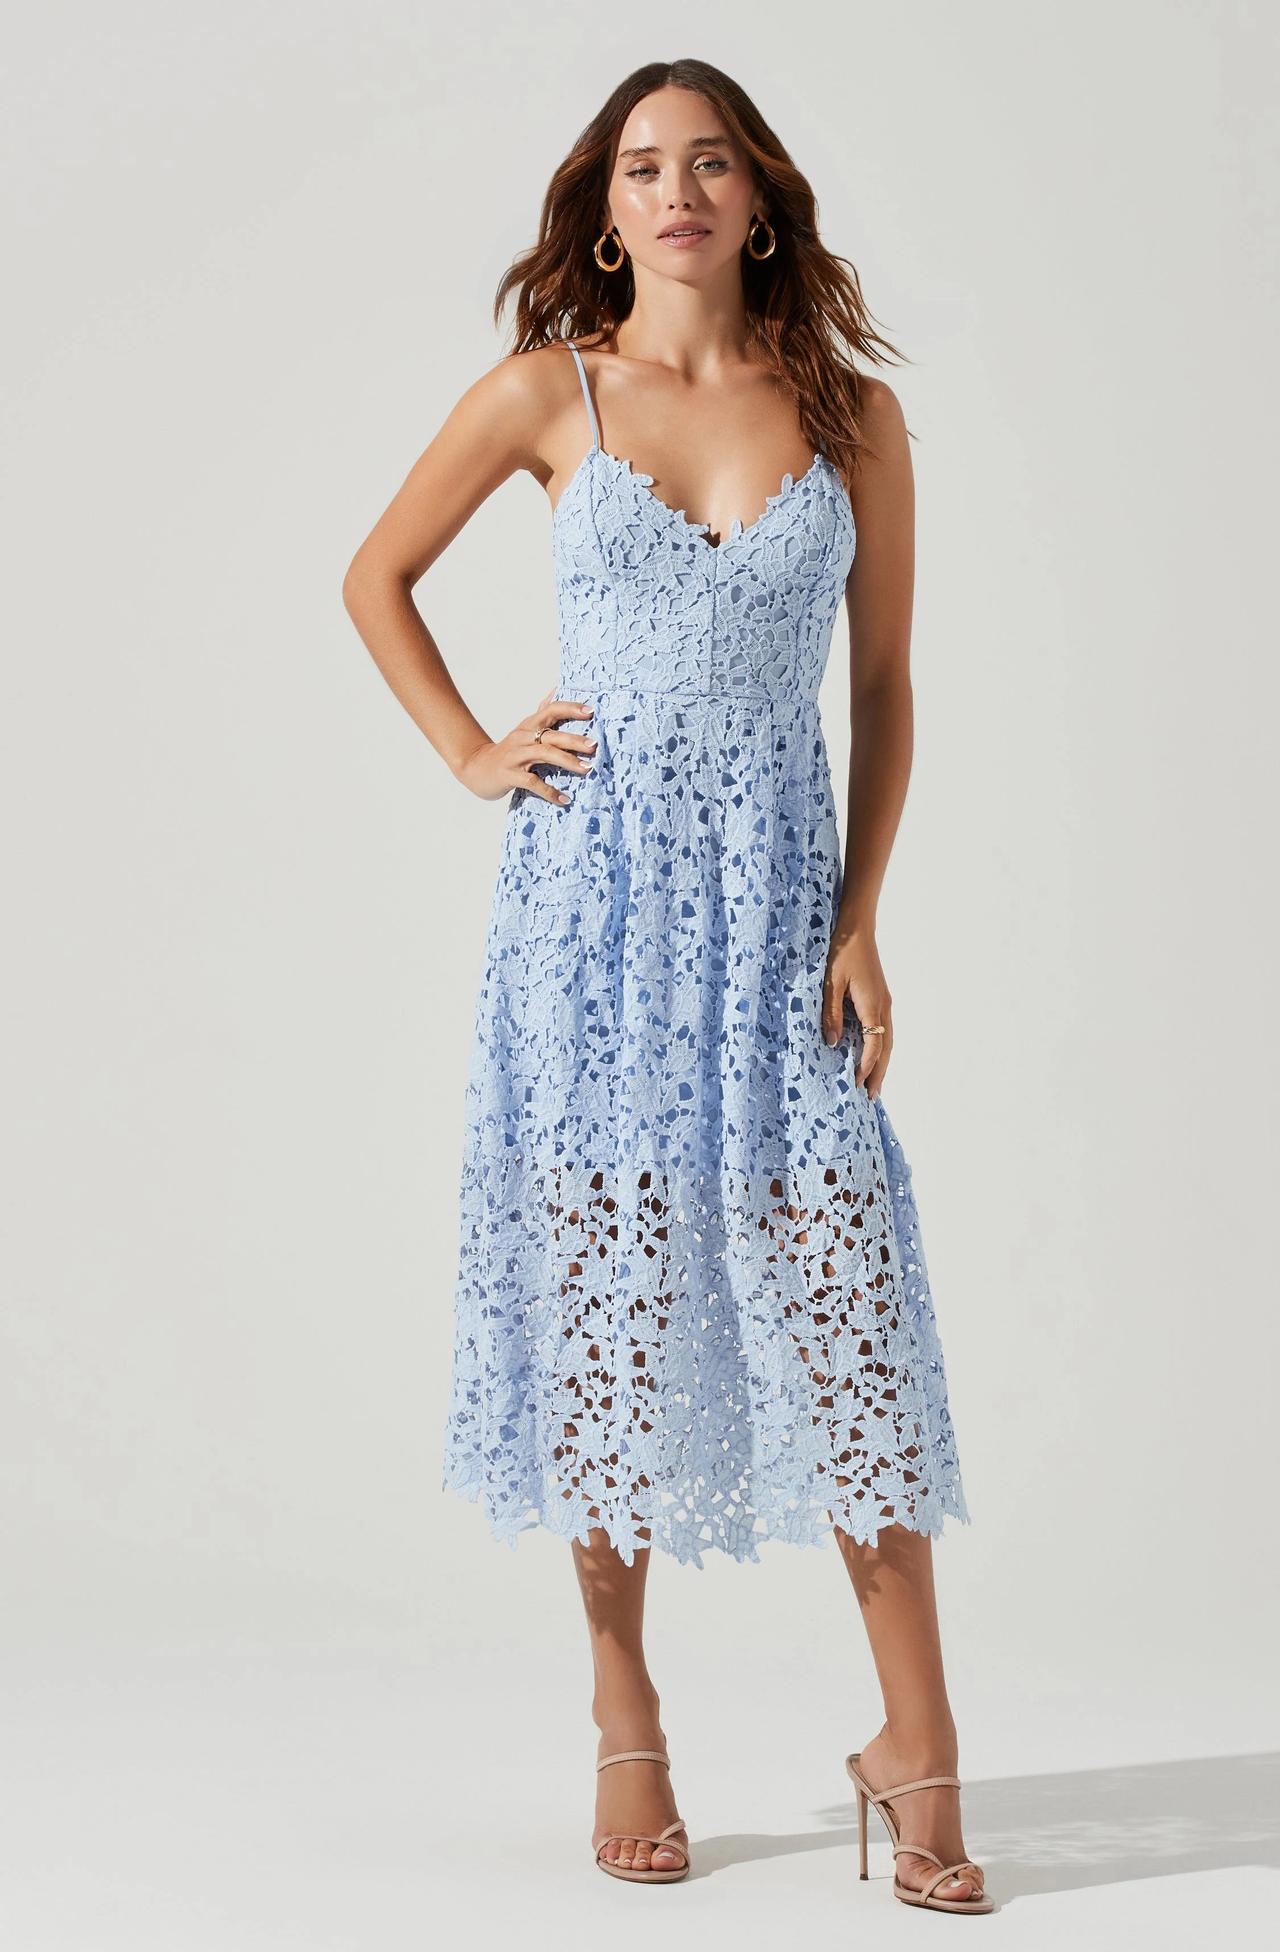 The Best Summer Wedding Guest Dresses For 6 Types of Weddings - Lake Shore  Lady